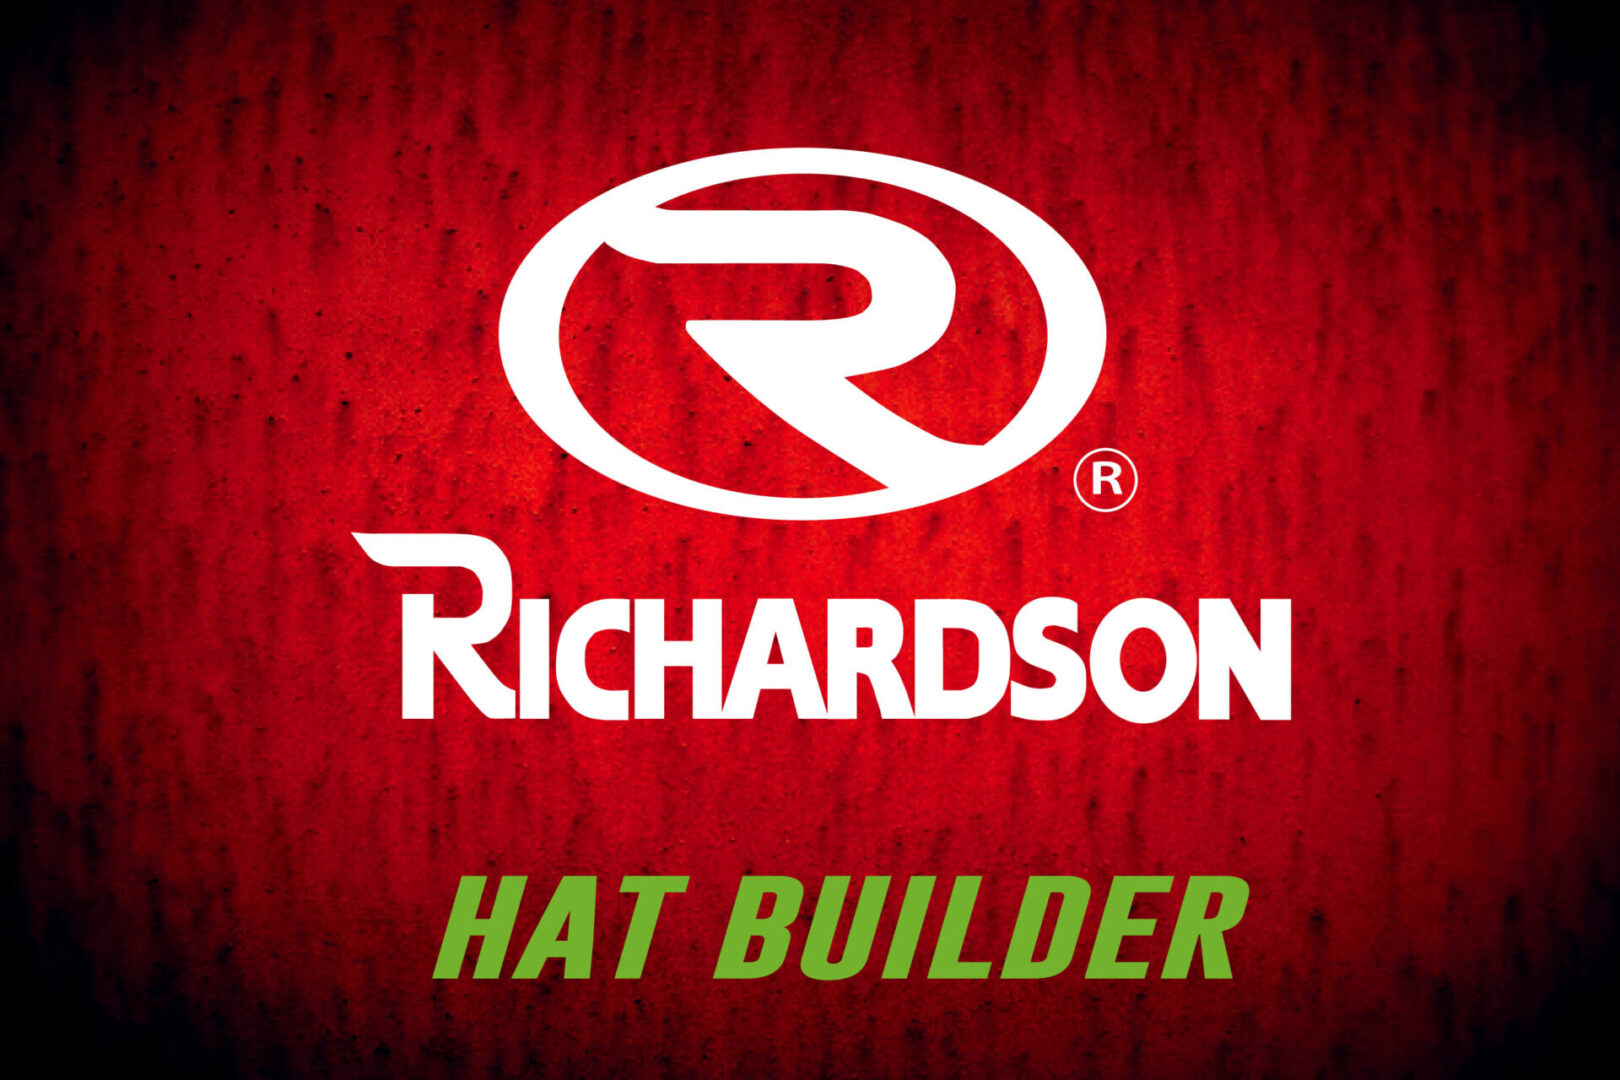 A red background with the richardson logo in front of it.